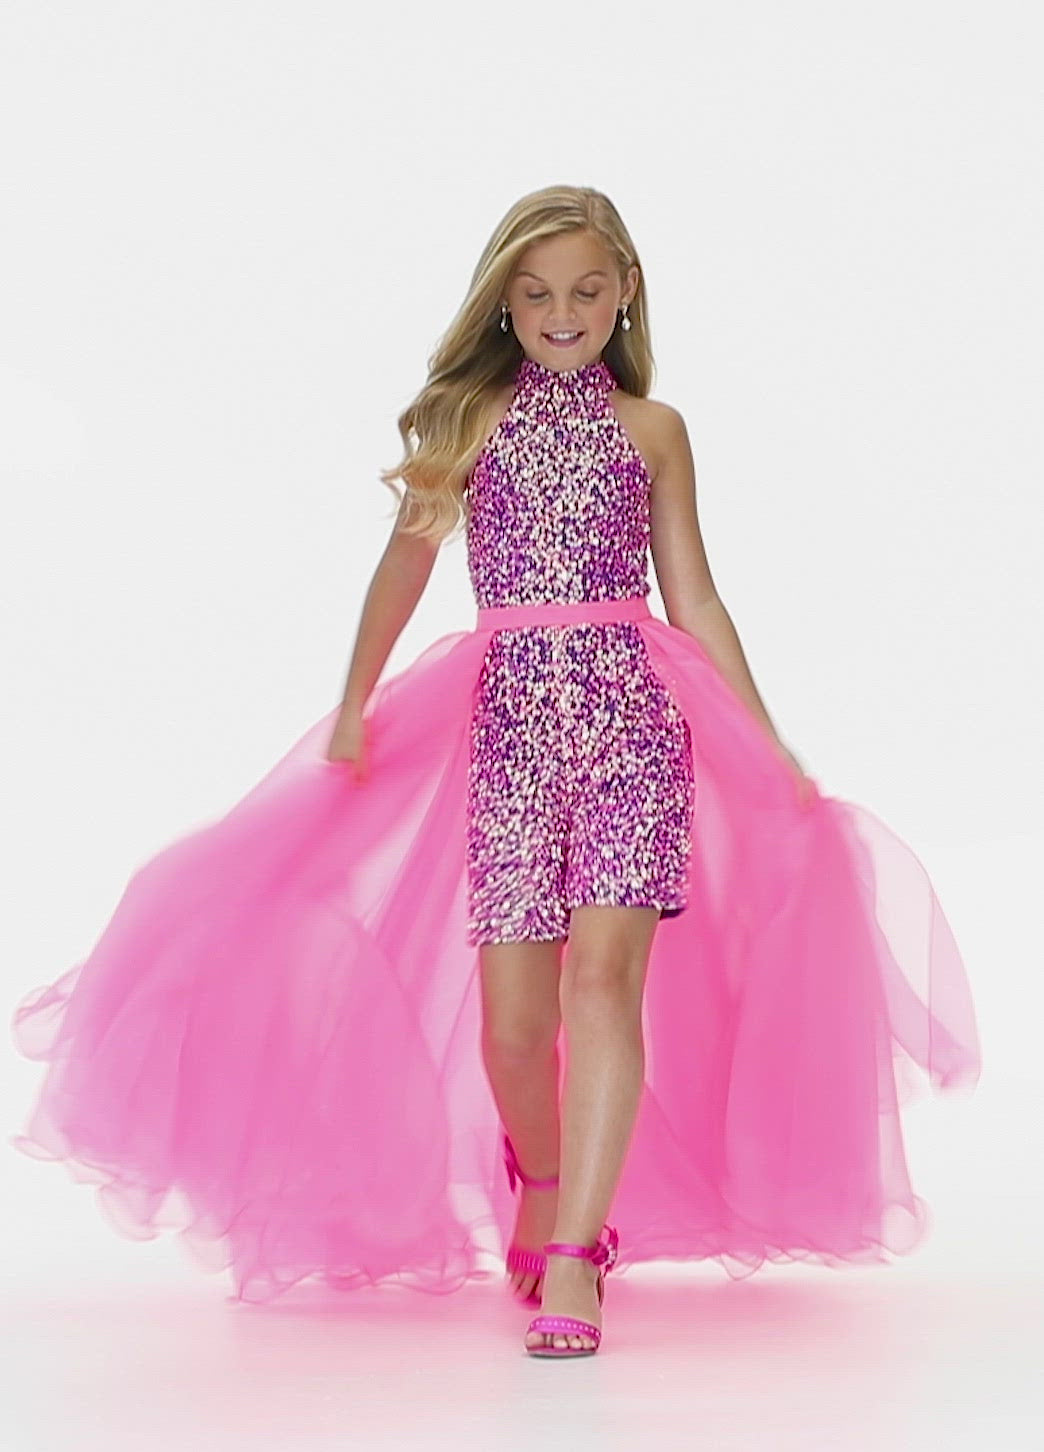 Ashley Lauren 8067 Pair this kids organza overskirt with wire hem with your favorite ASHLEYlauren jumpsuit, romper or cocktail dress. Ashley Lauren 8067 Kids Organza Overskirt with Wire Hem Fun Fashion Pageant Girls  Colors Hot Pink, Ivory, Fuchsia, Lilac, Pink, Royal, Sky, Jade  Sizes  4, 6, 8, 10, 12, 14  Wire Hem Organza Pictured Here with Jumpsuit Style 8069